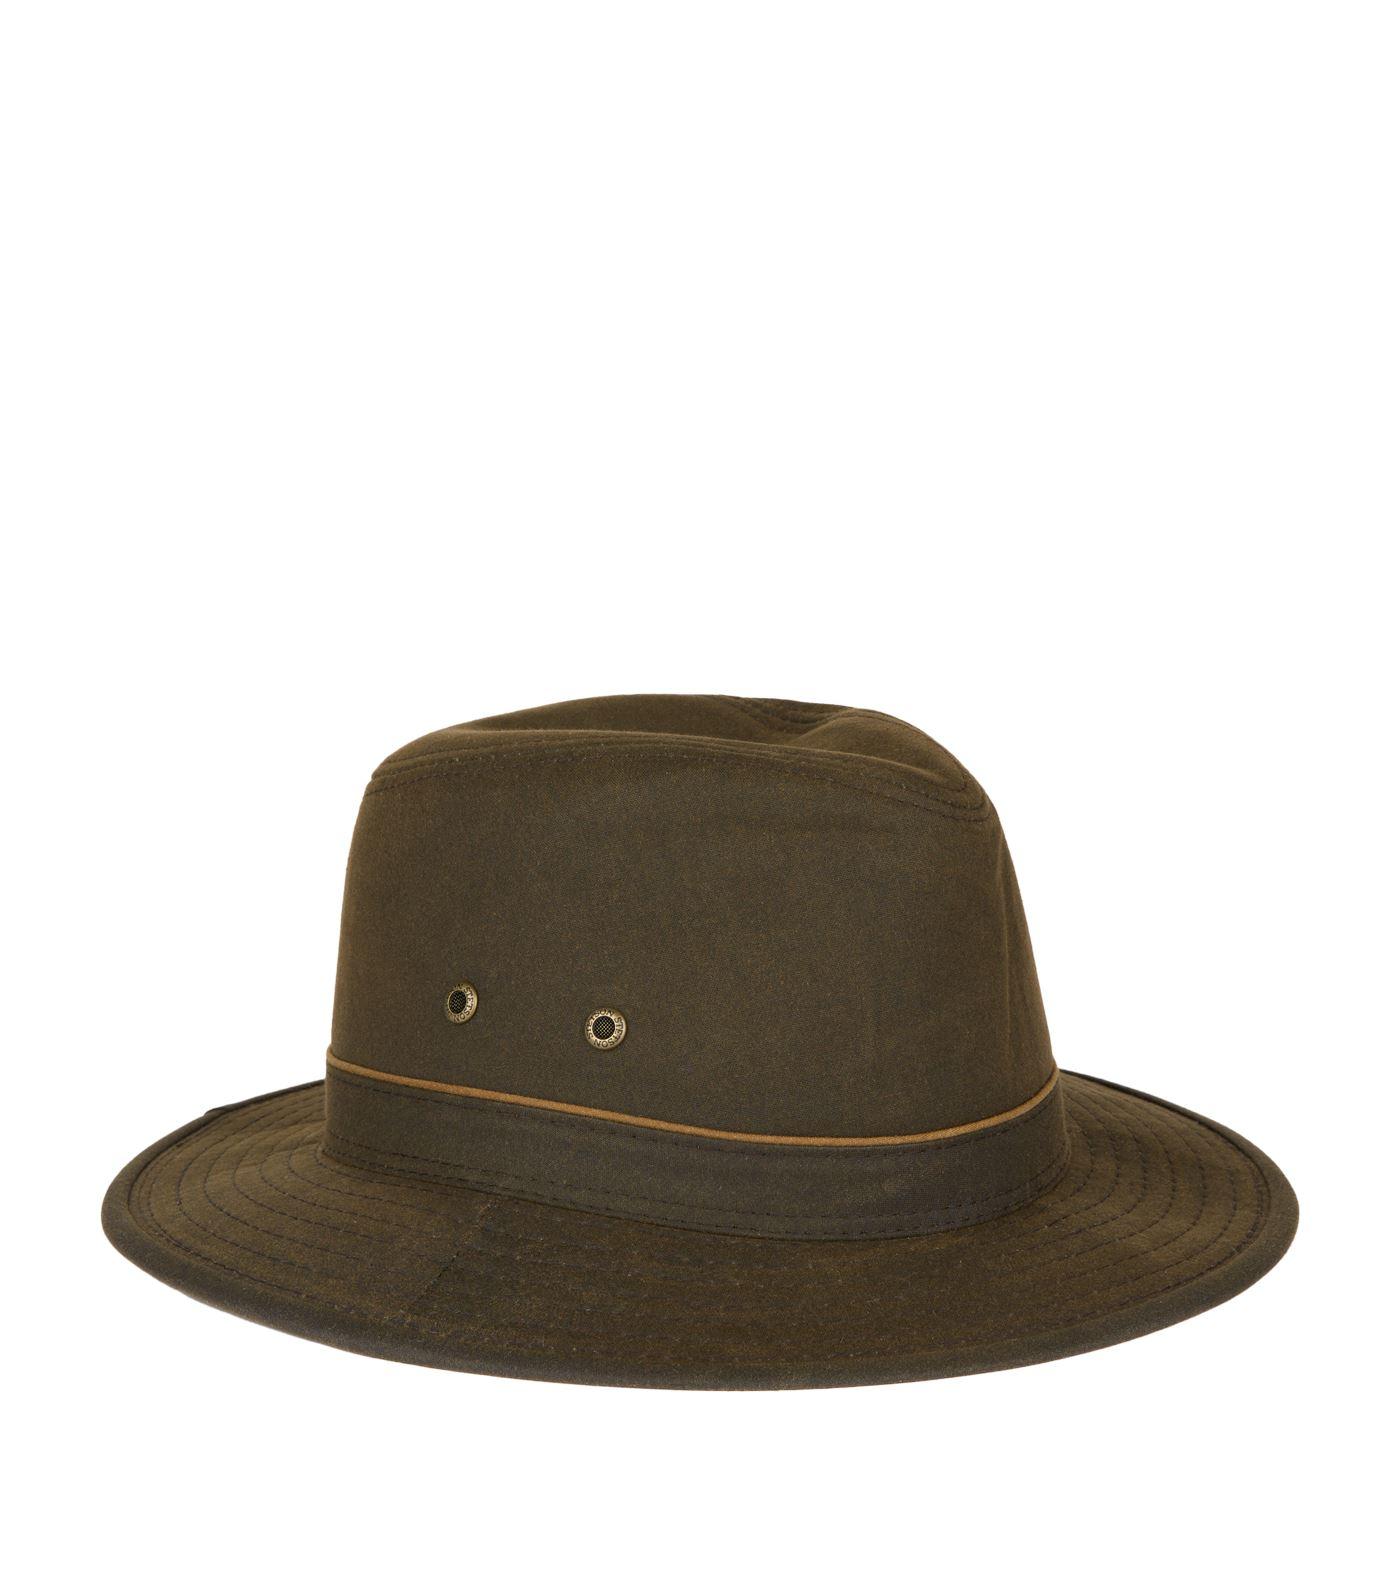 Stetson Ava Waxed Cotton Hat in Green for Men - Lyst